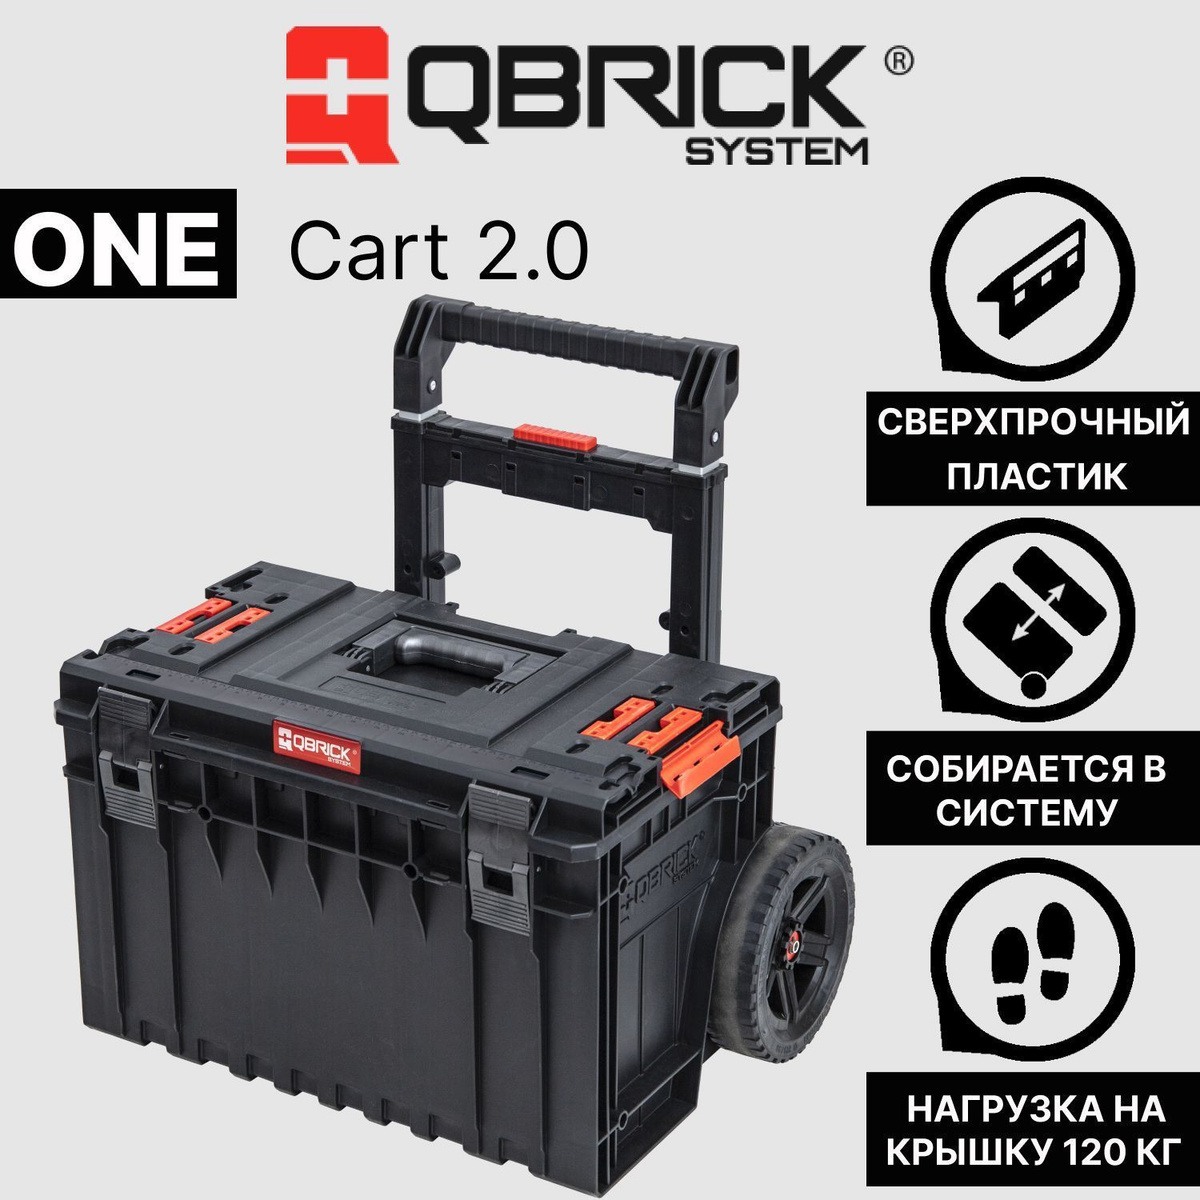 Qbrick System ONE Cart 2.0